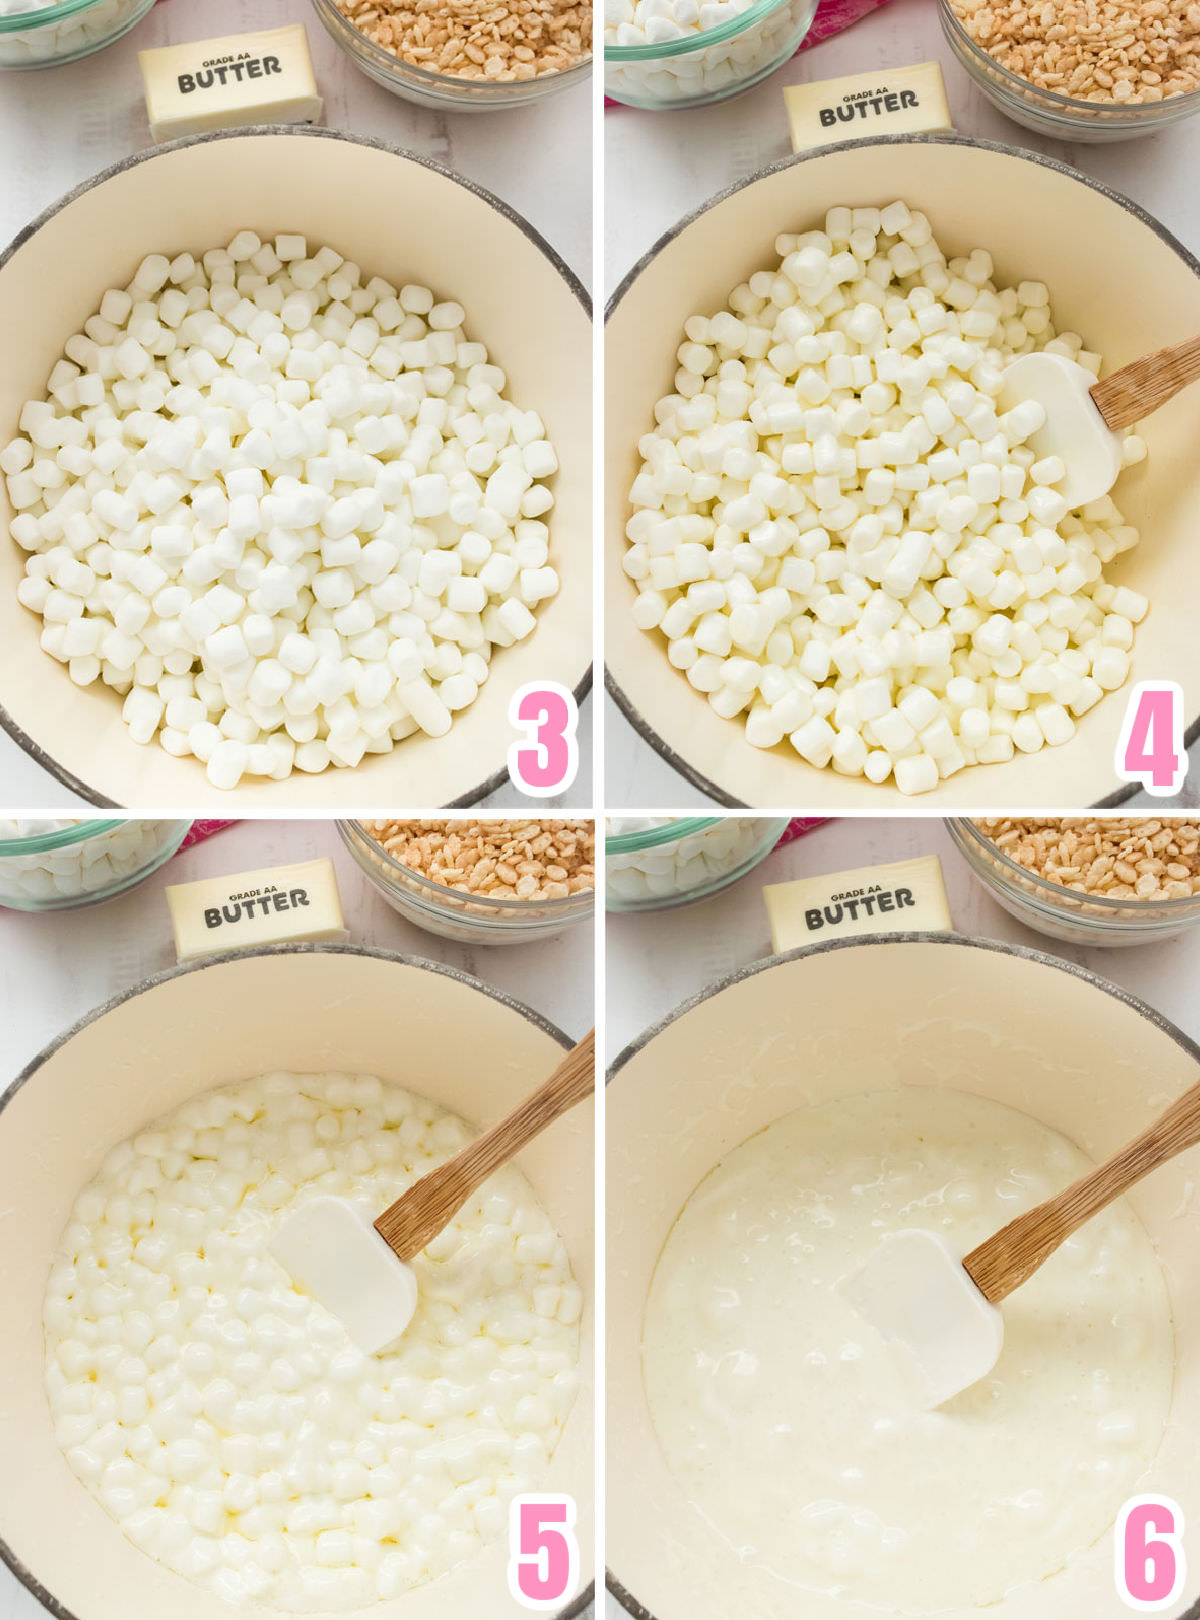 Collage image showing the steps for making the marshmallow mixture.